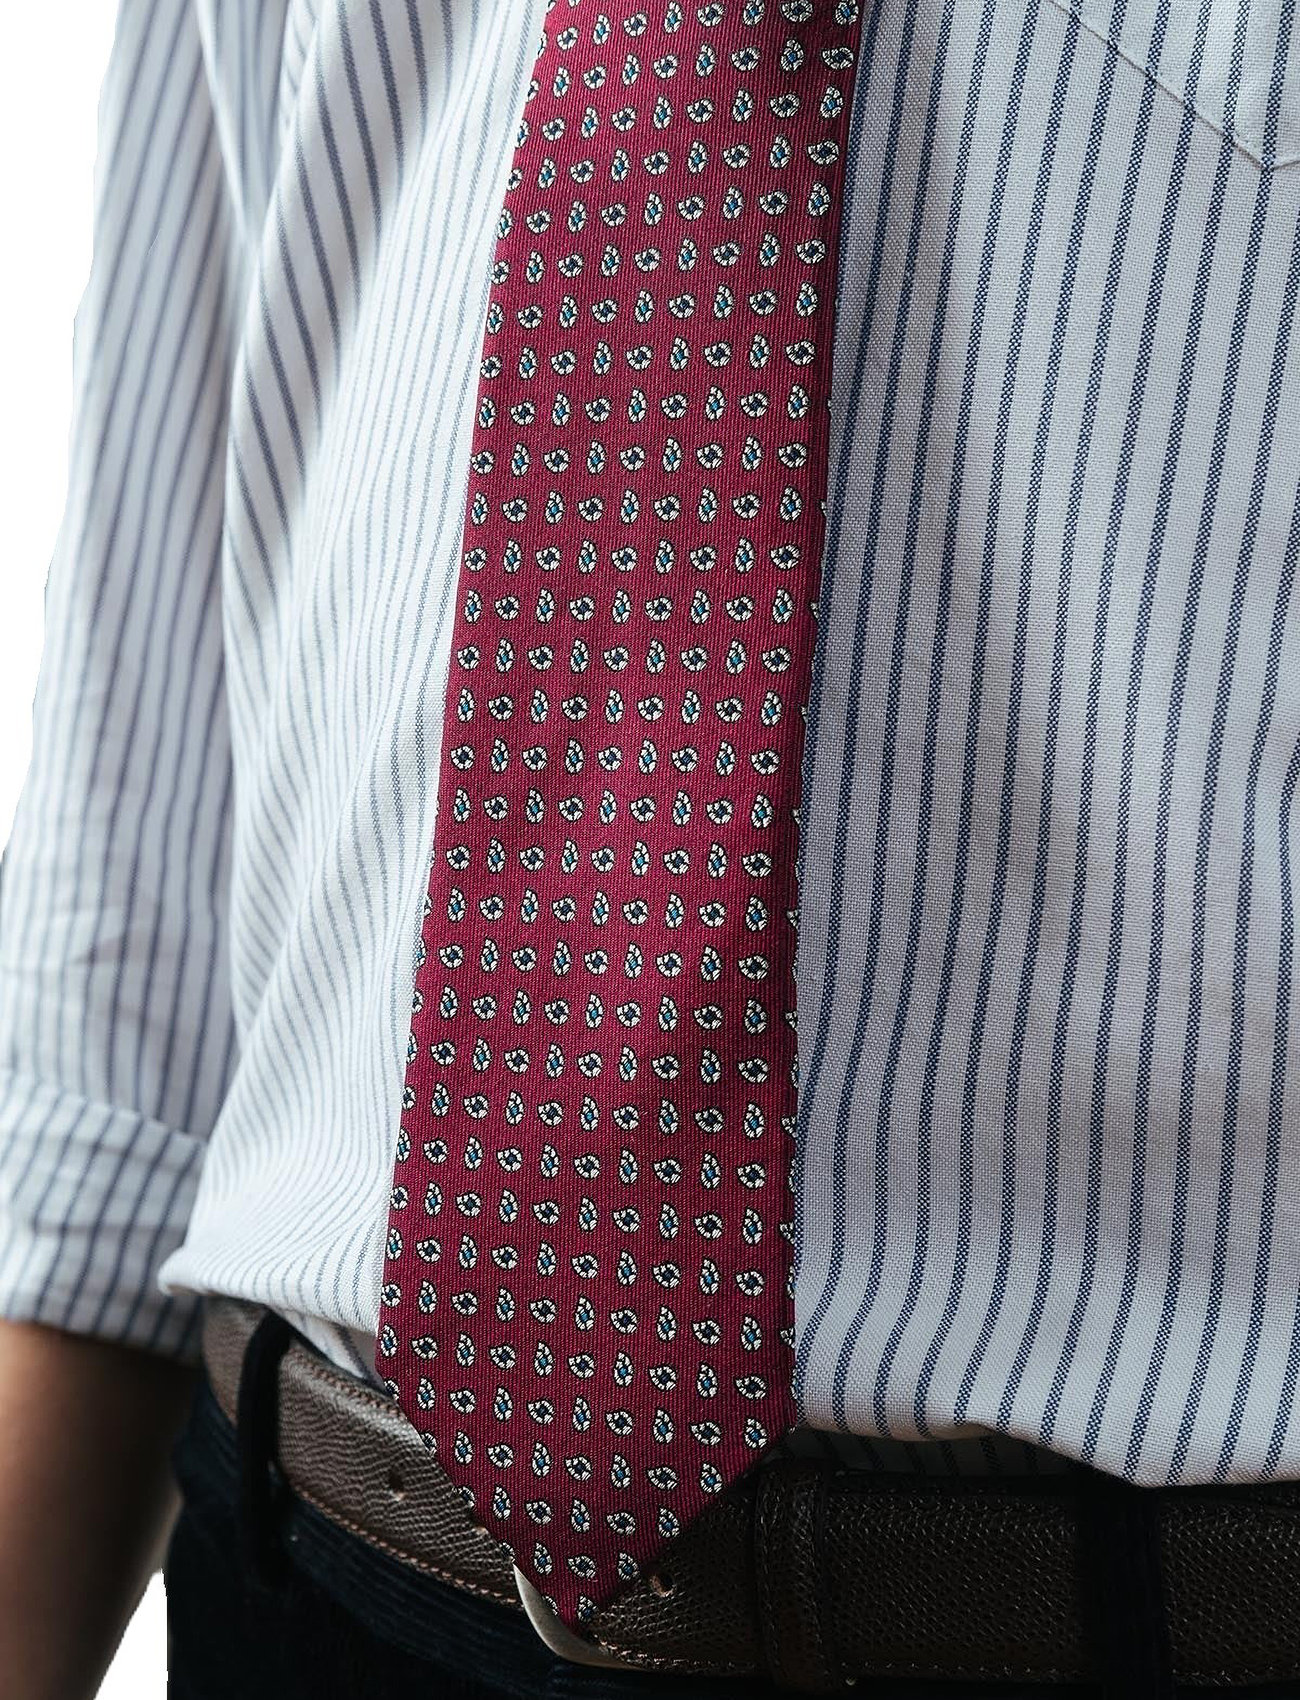 AN IVY - The Counselor - ties - red/white/blue - 1